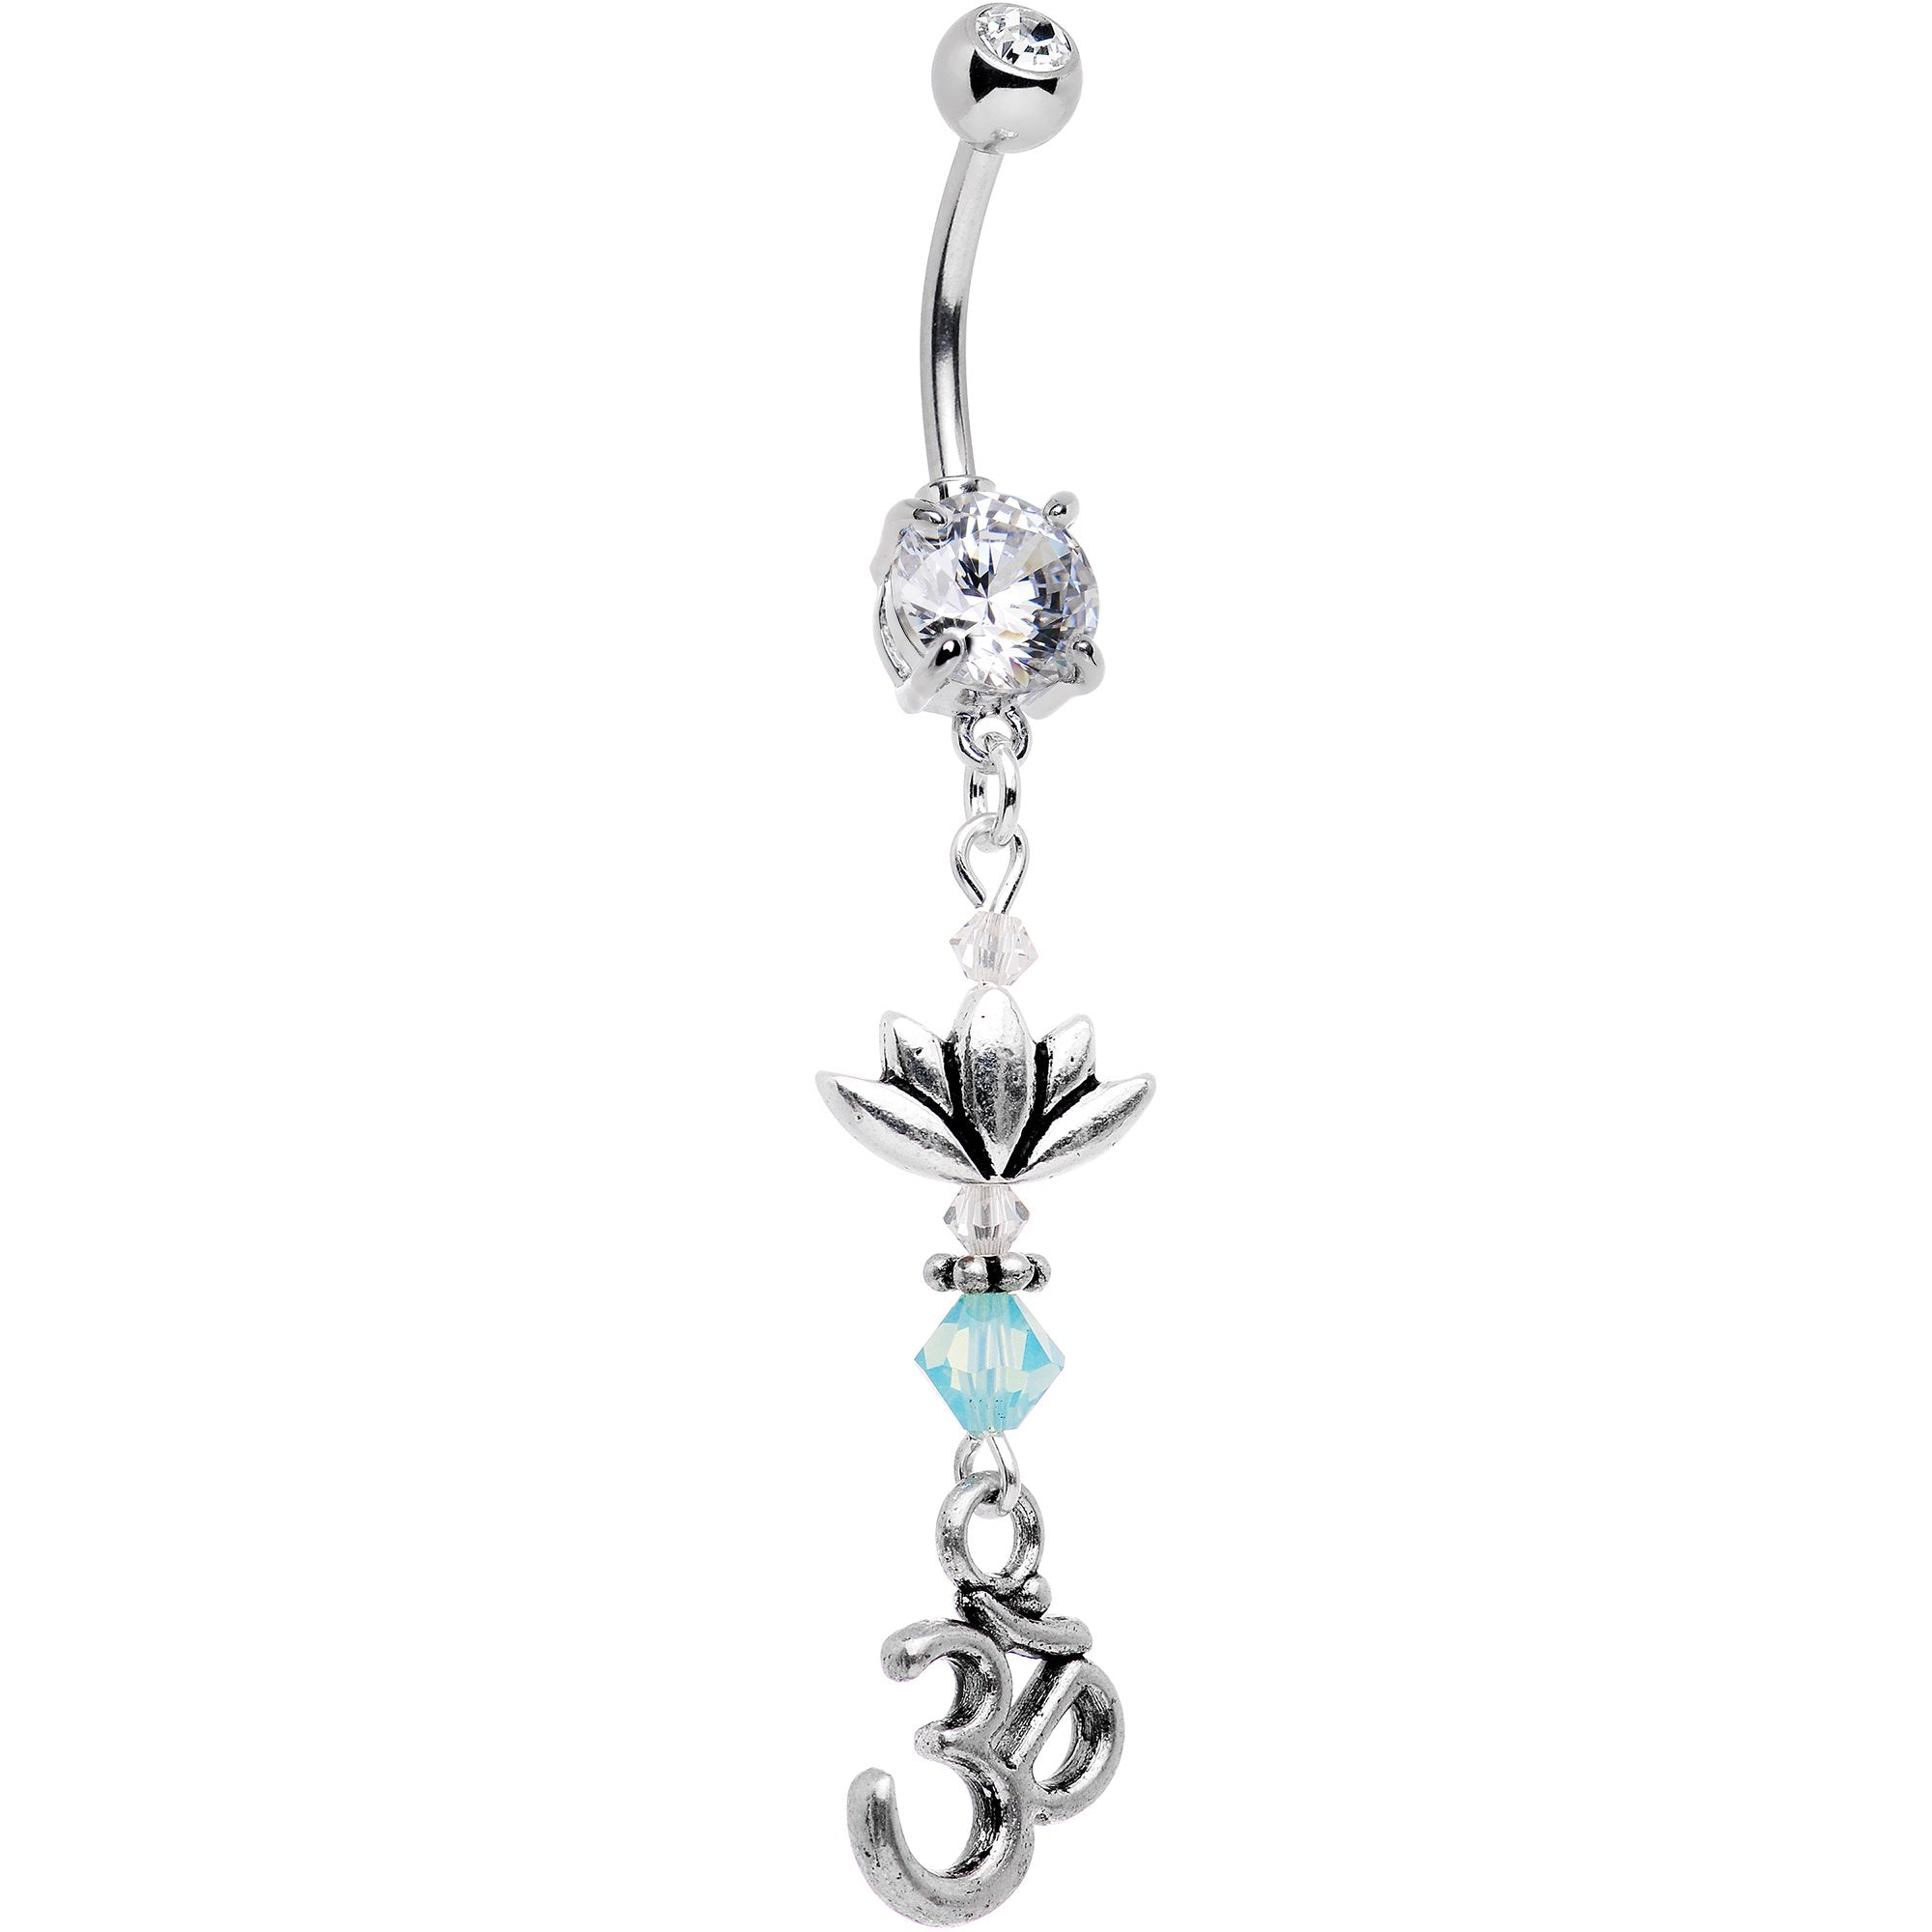 Ohm Lotus Flower Dangle Belly Ring Created with Crystals